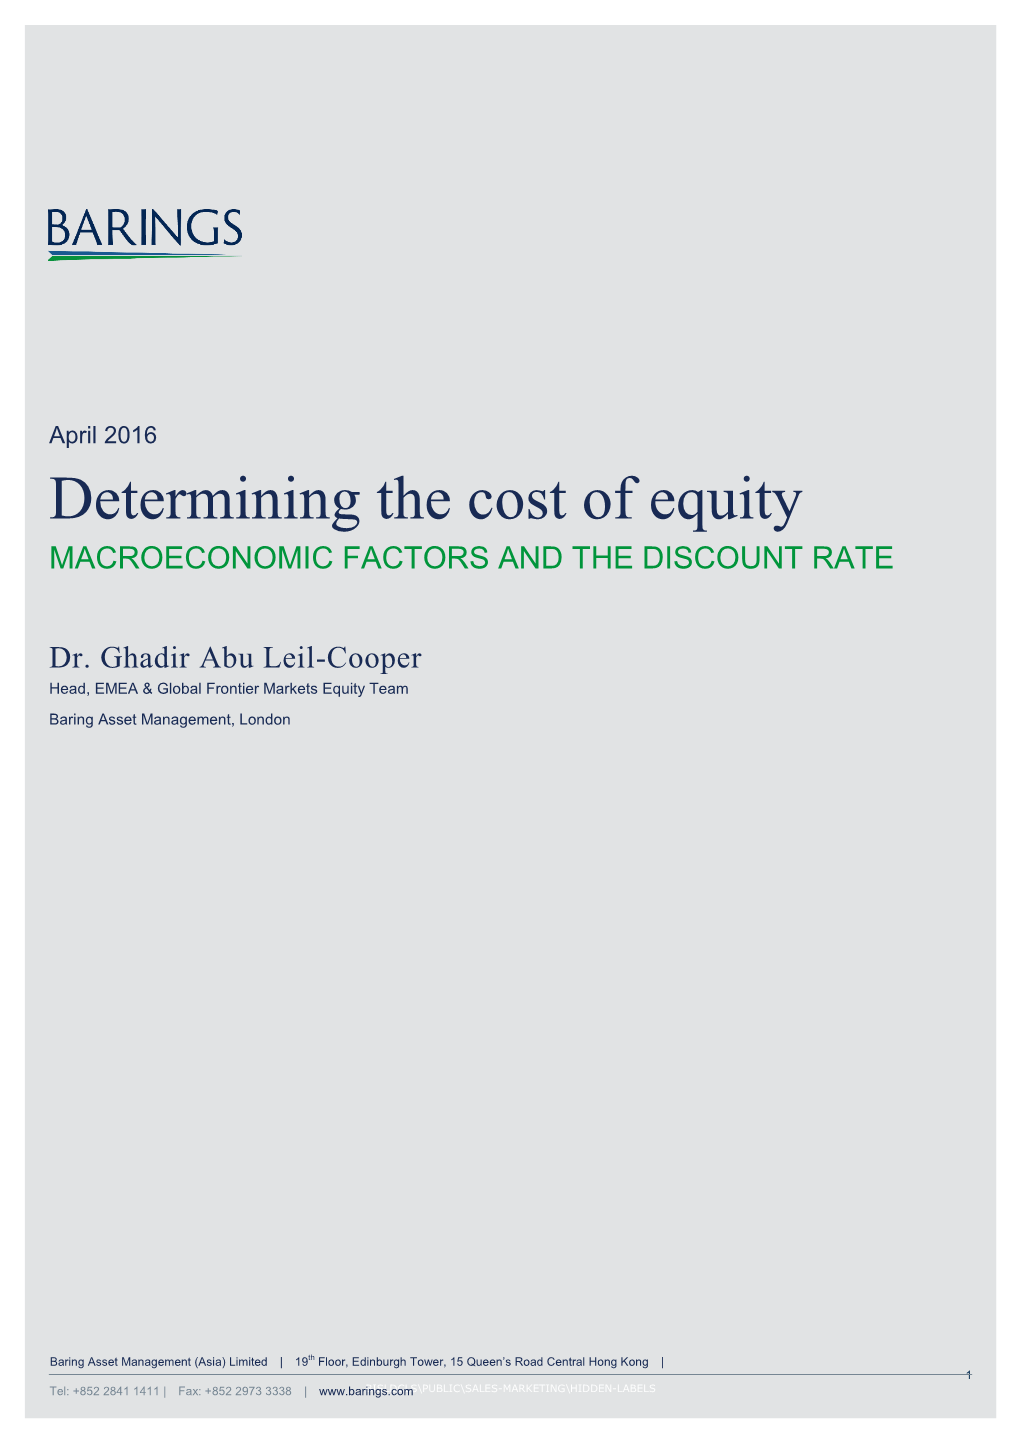 Determining the Cost of Equity MACROECONOMIC FACTORS and the DISCOUNT RATE